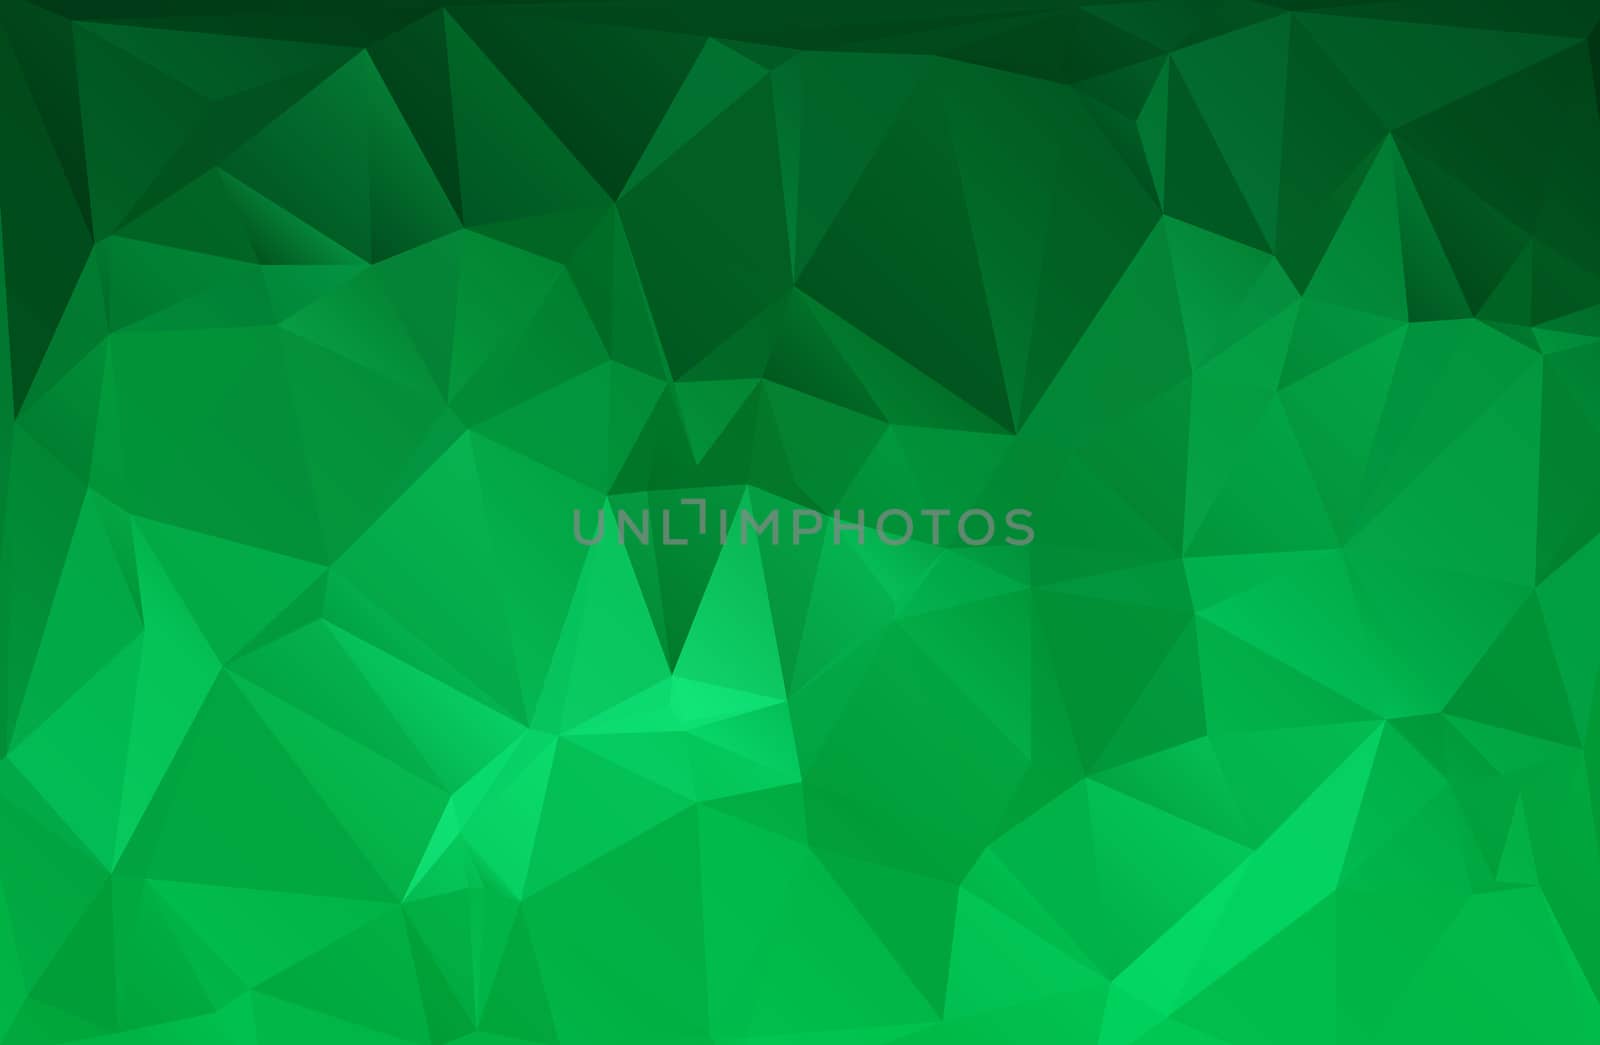 Abstract polygonal background by ires007